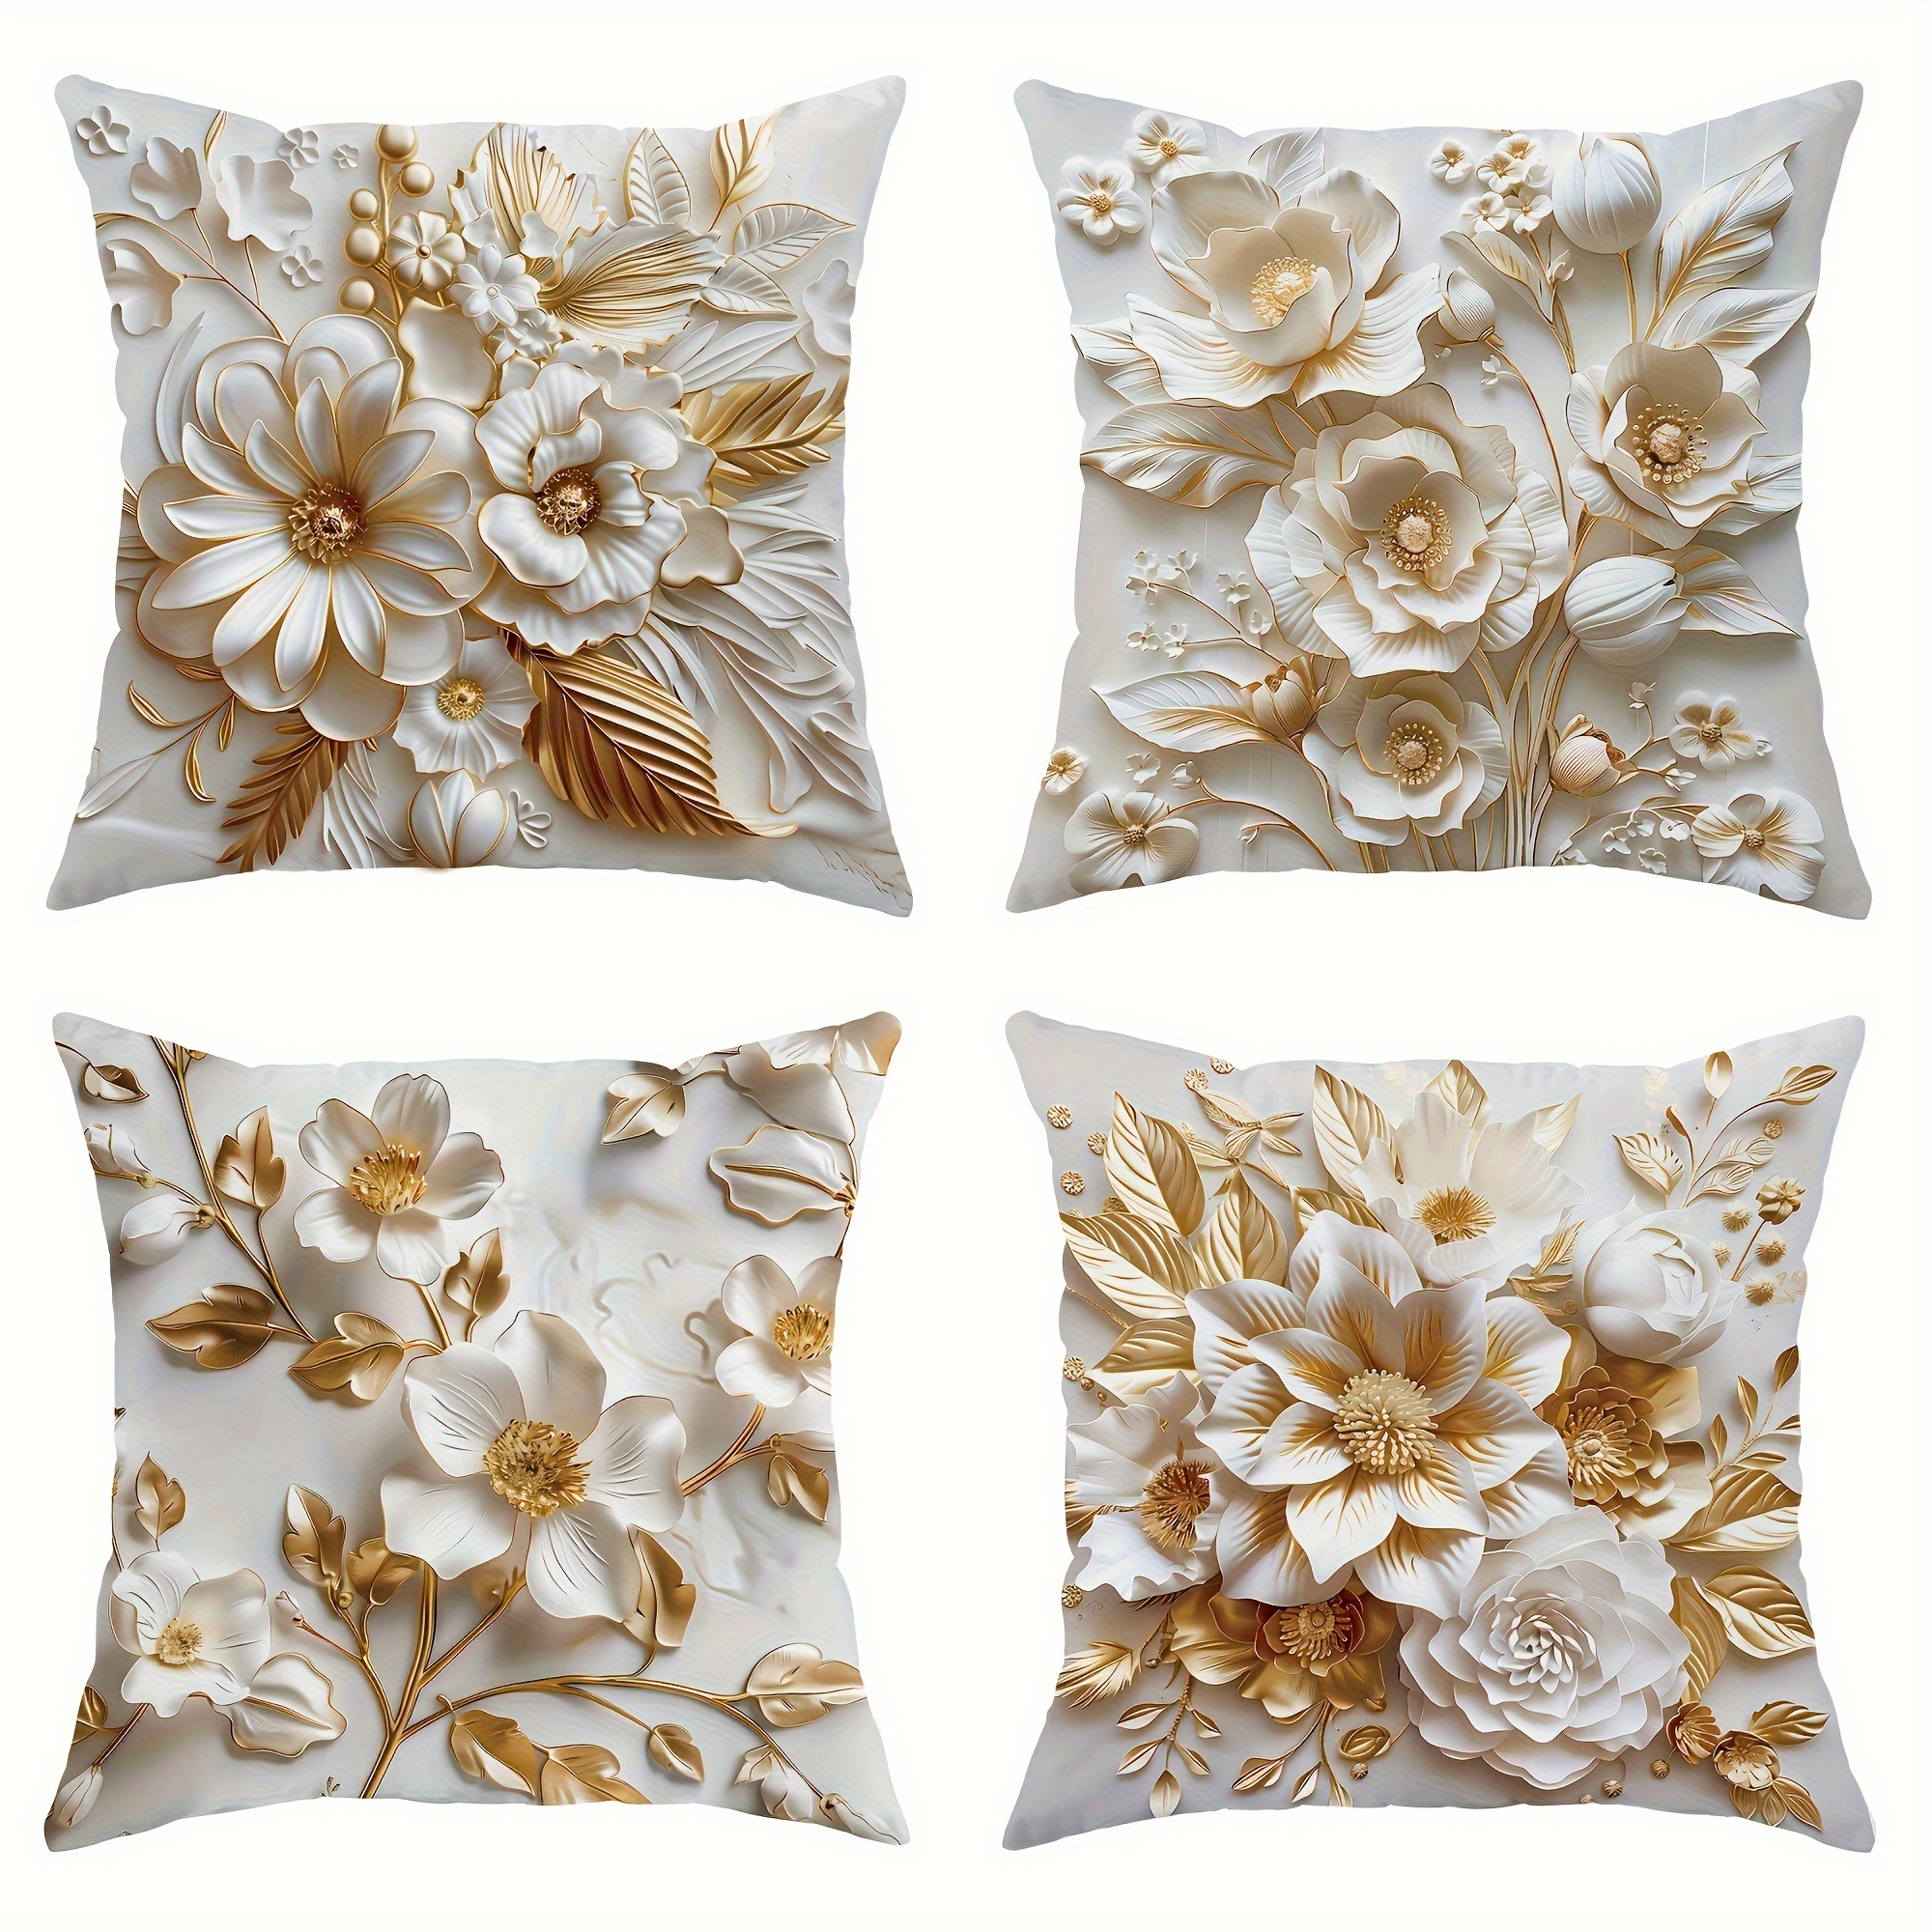 

Luxurious White Gilded 3d Floral Decorative Pillow Covers, Contemporary Style, Zip Closure, Machine Washable, Polyester, Perfect For Living Room And Bedroom Sofa Decor, 18x18 Inches - Set Of 4